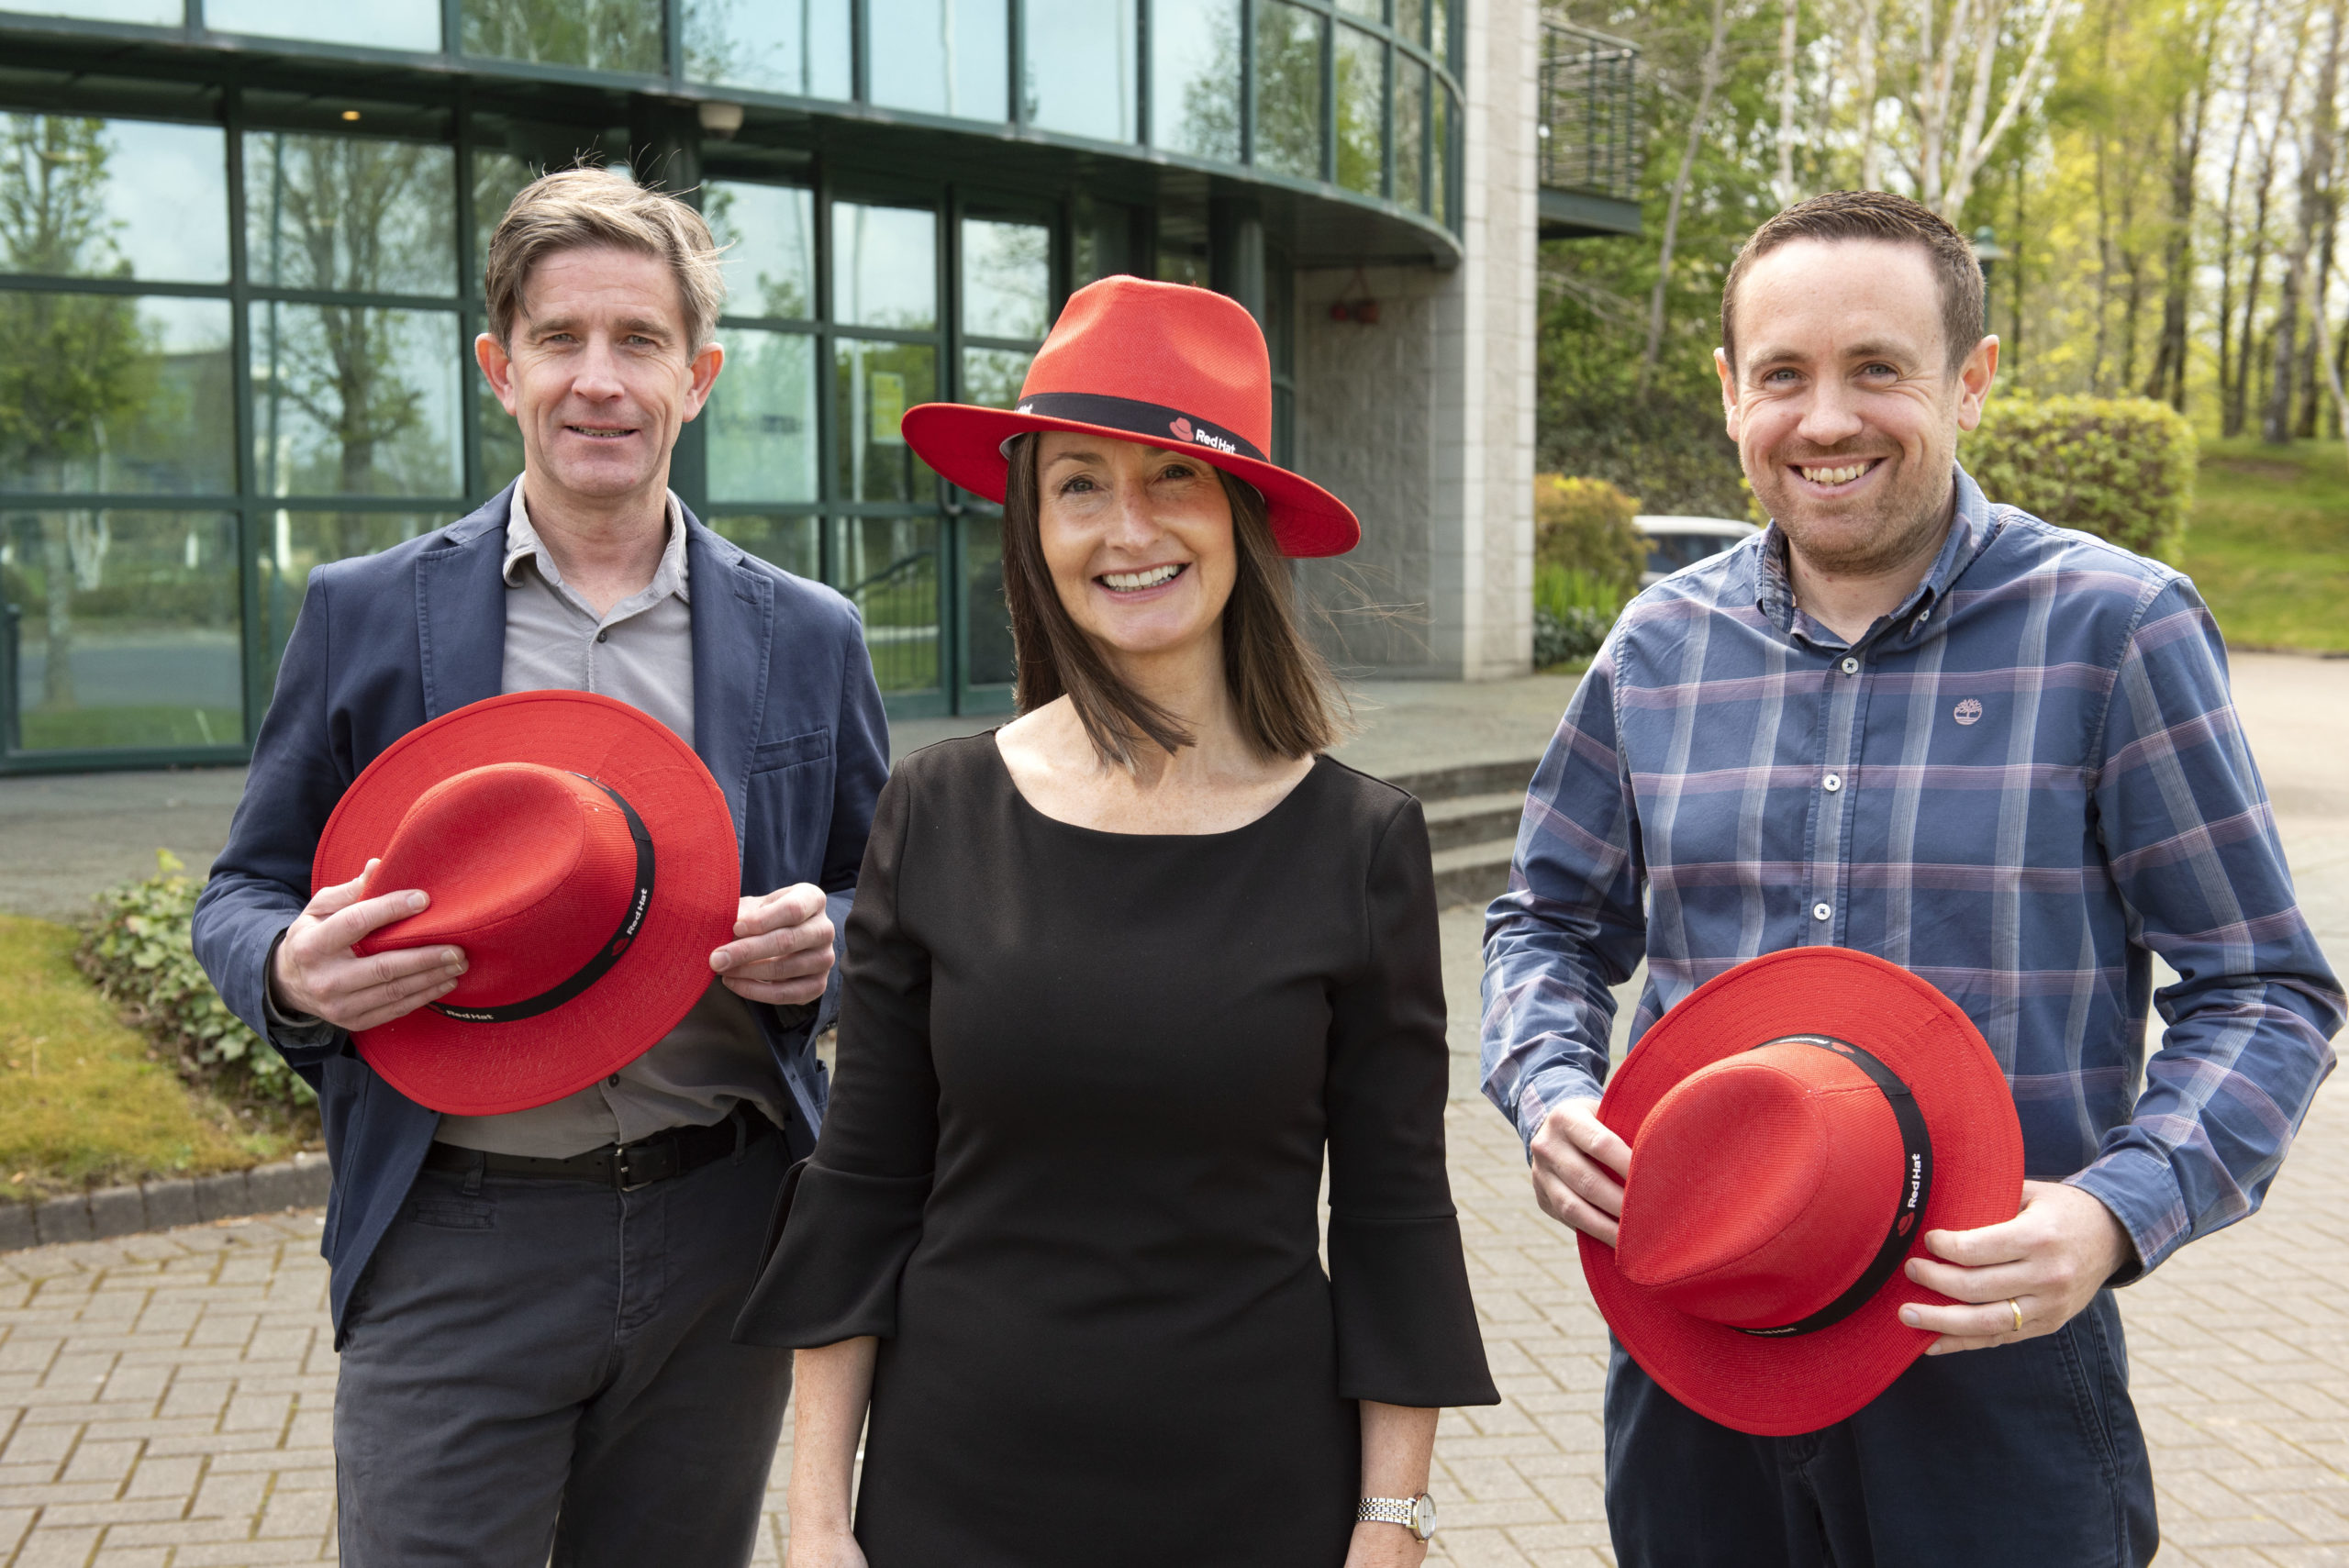 Agile Networks is a Red Hat Advanced Business Partner: L-r Michael Kinsella, Agile, Niamh Carroll, Red Hat and Kenn Larkin, CEO, Agile